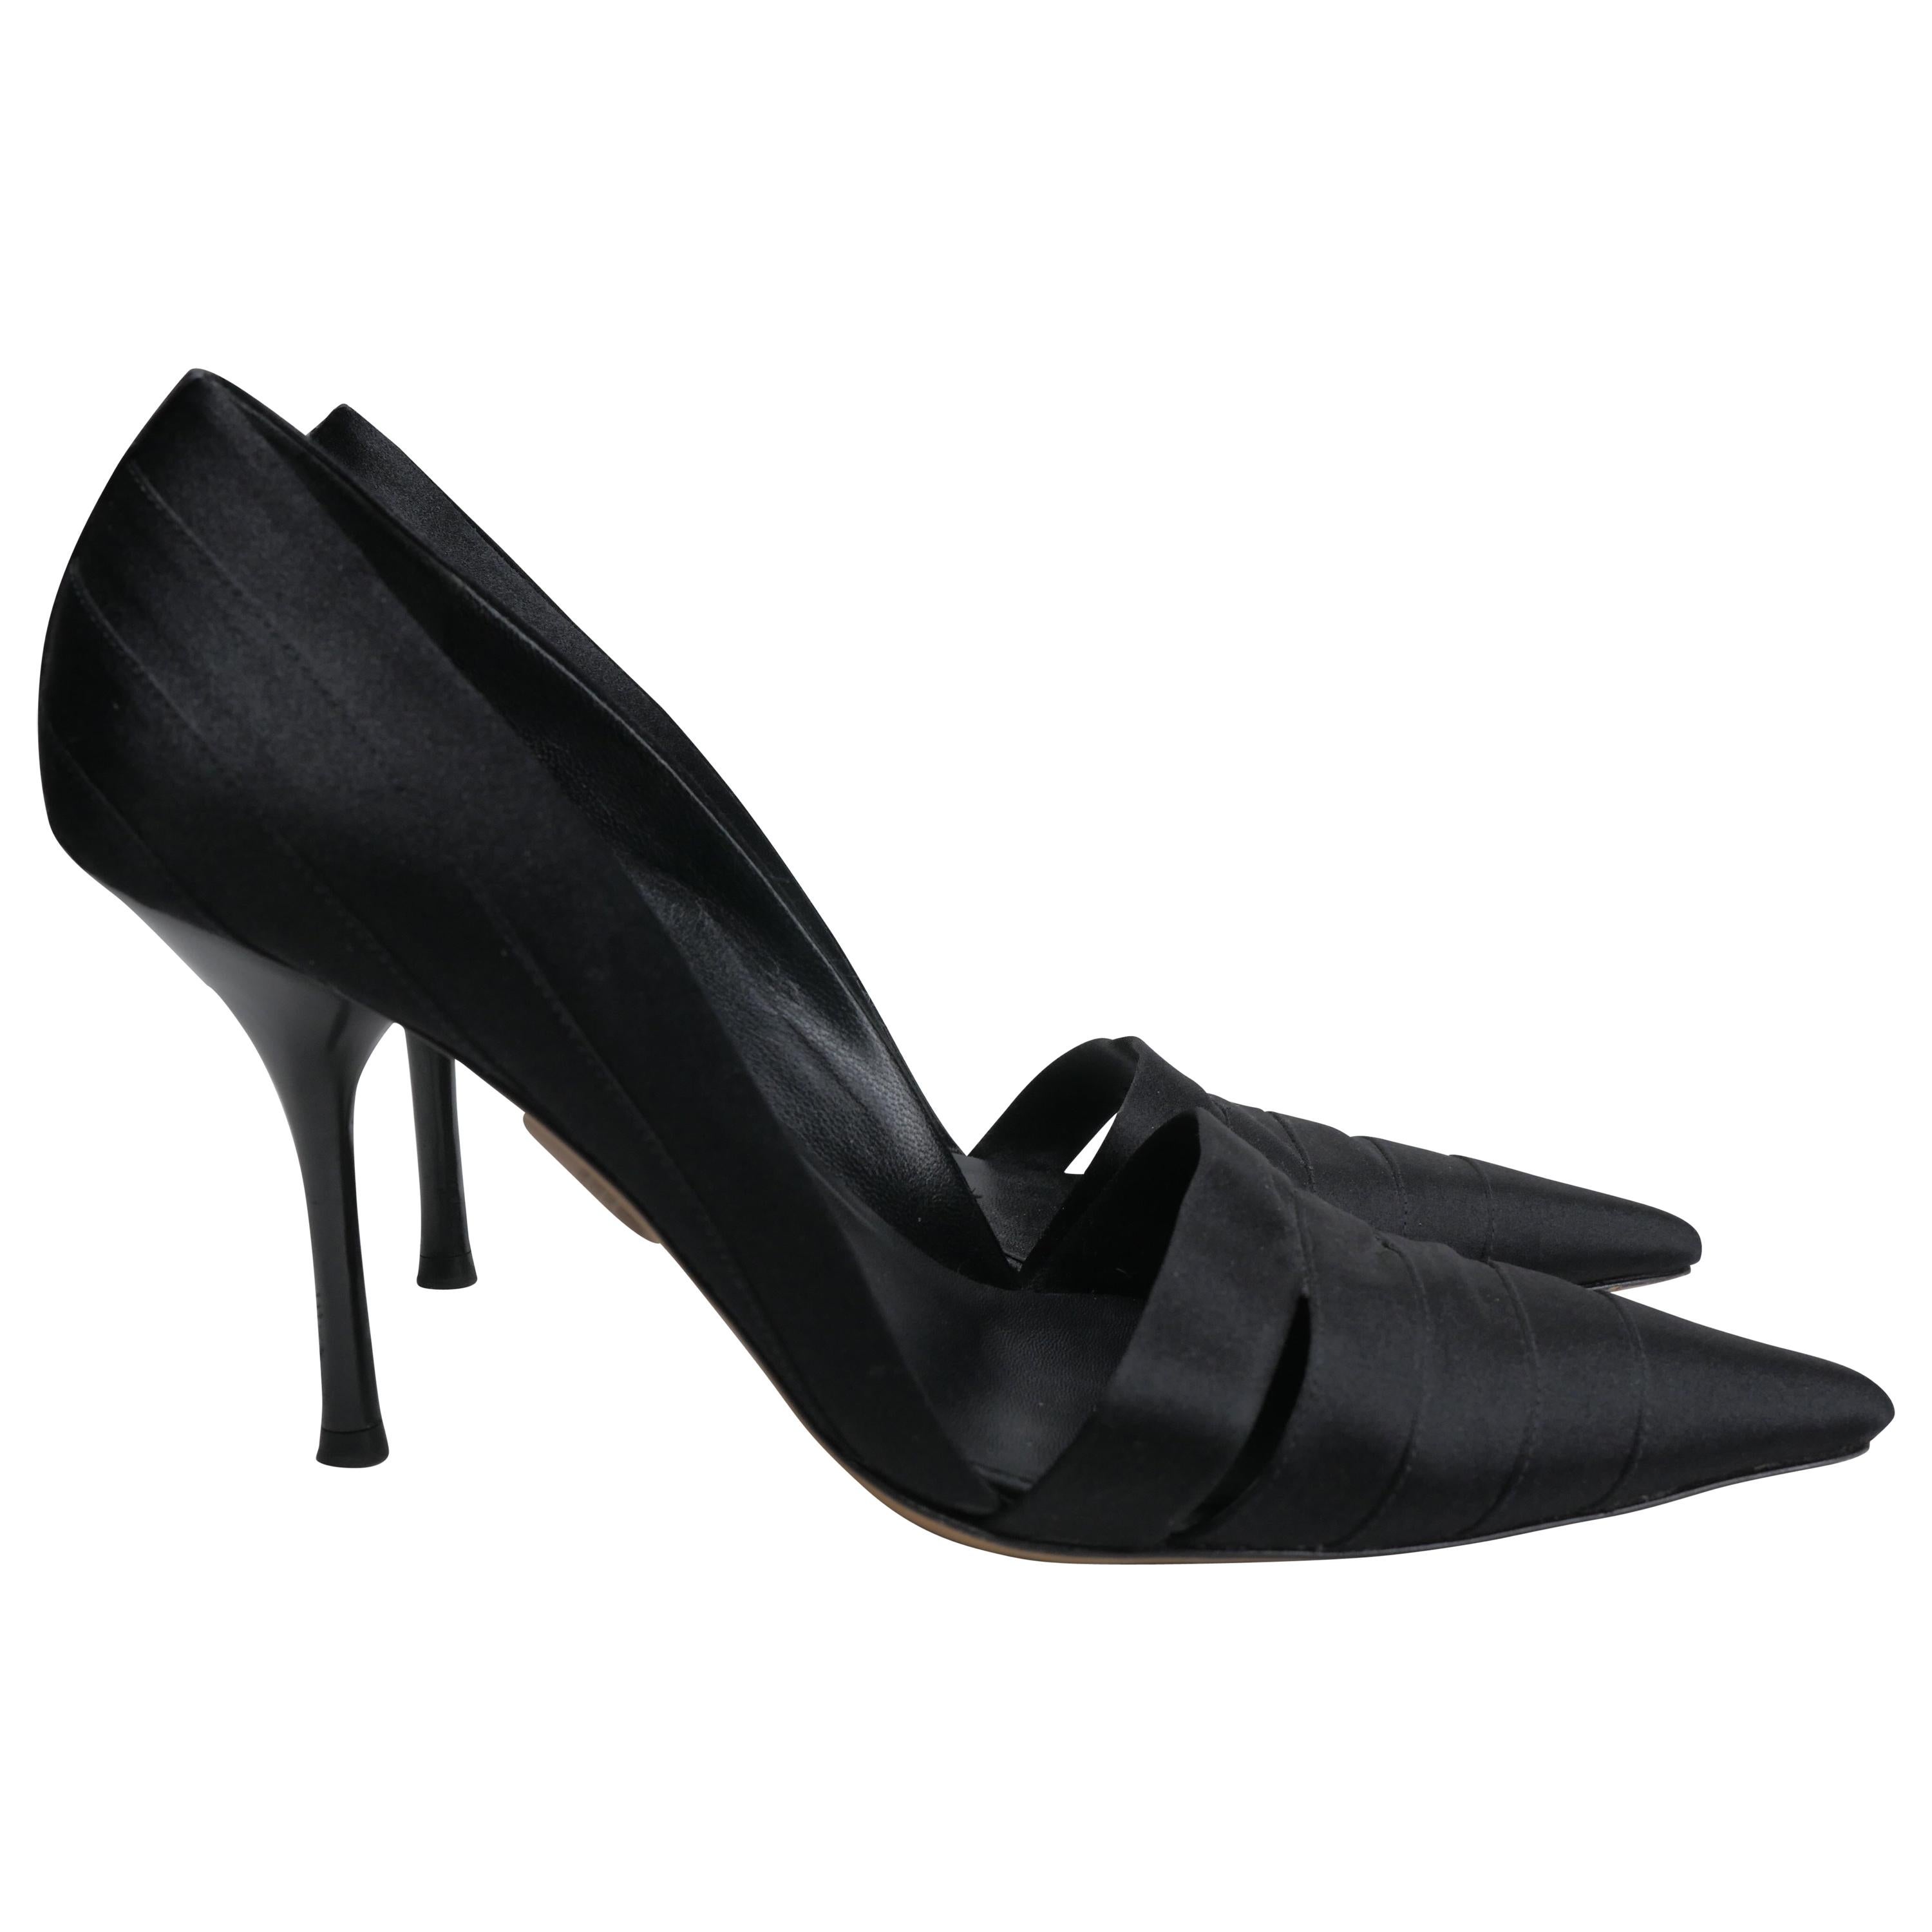 Gucci Size 38 Black Satin Pointed Toe Pumps